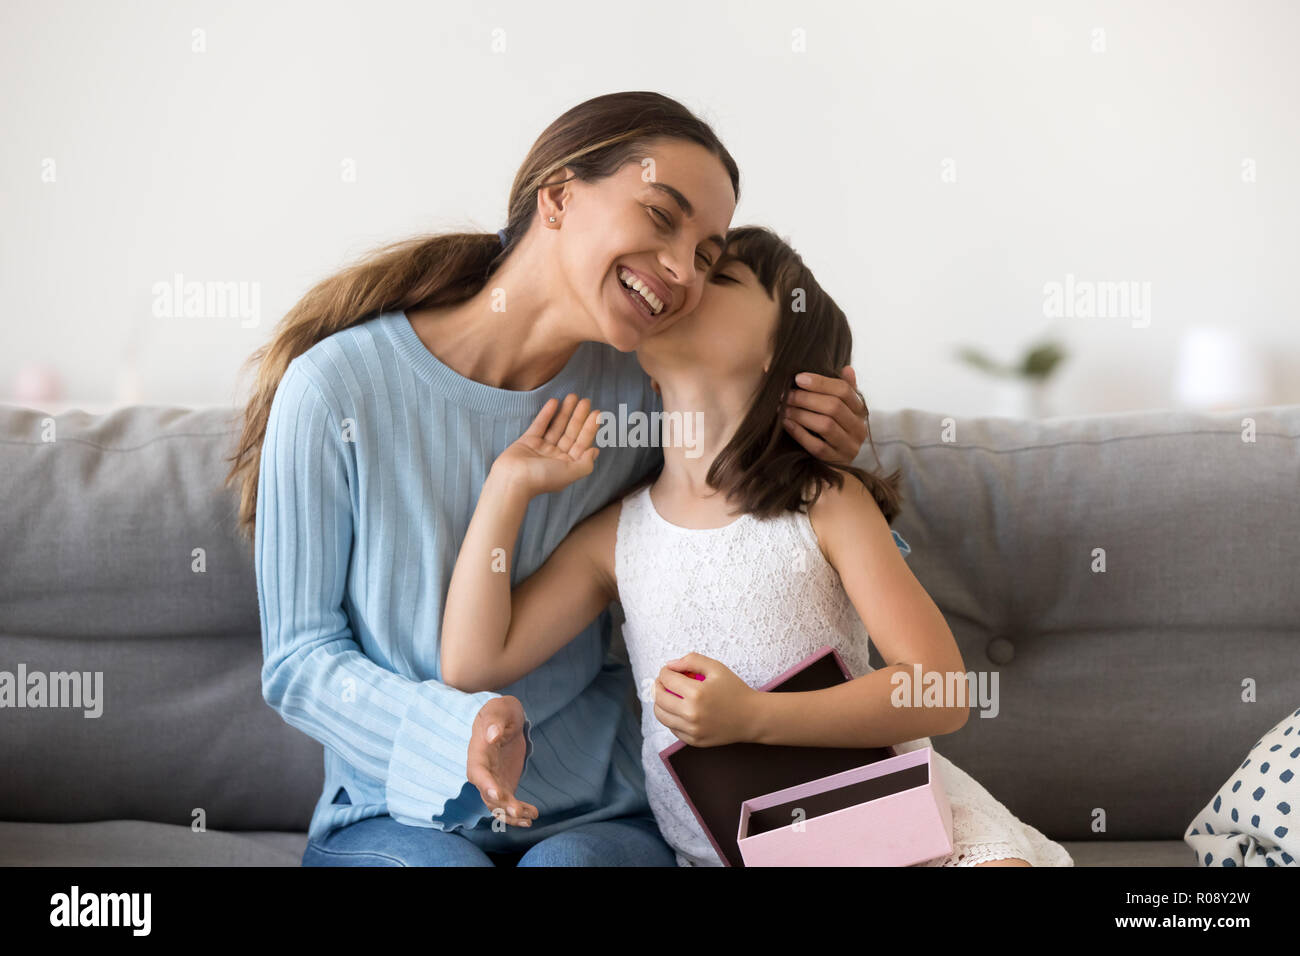 Grateful daughter receives from mother gift kissing her Stock Photo